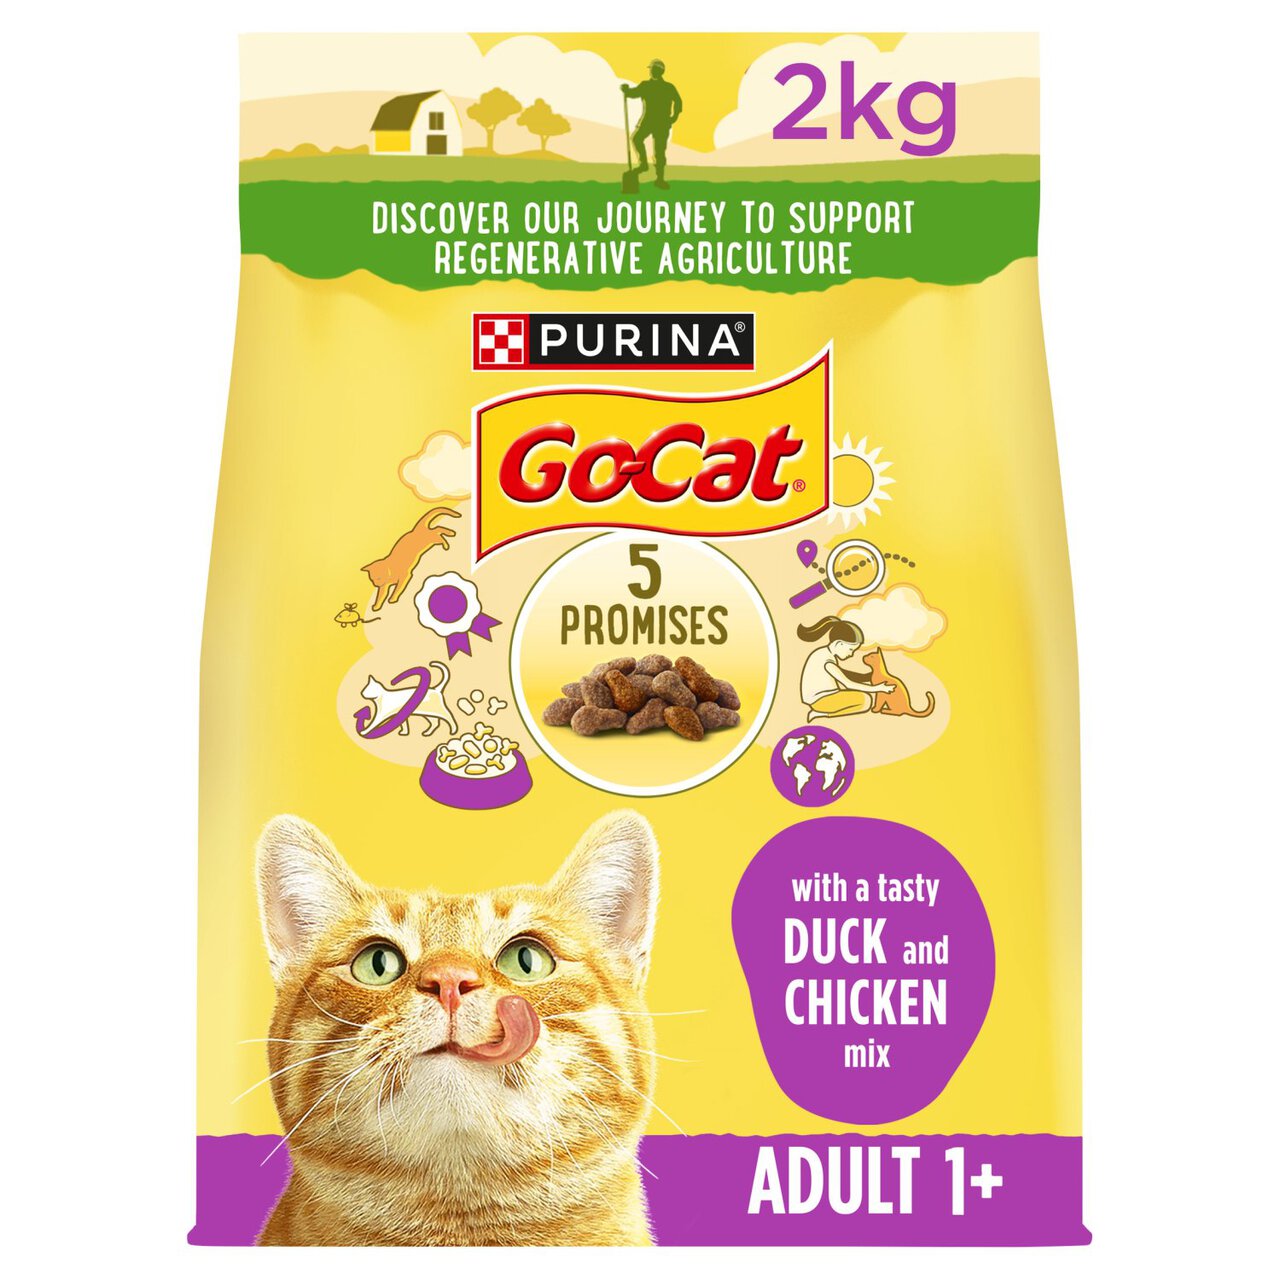 Go-Cat Adult Dry Cat Food Chicken and Duck 2kg